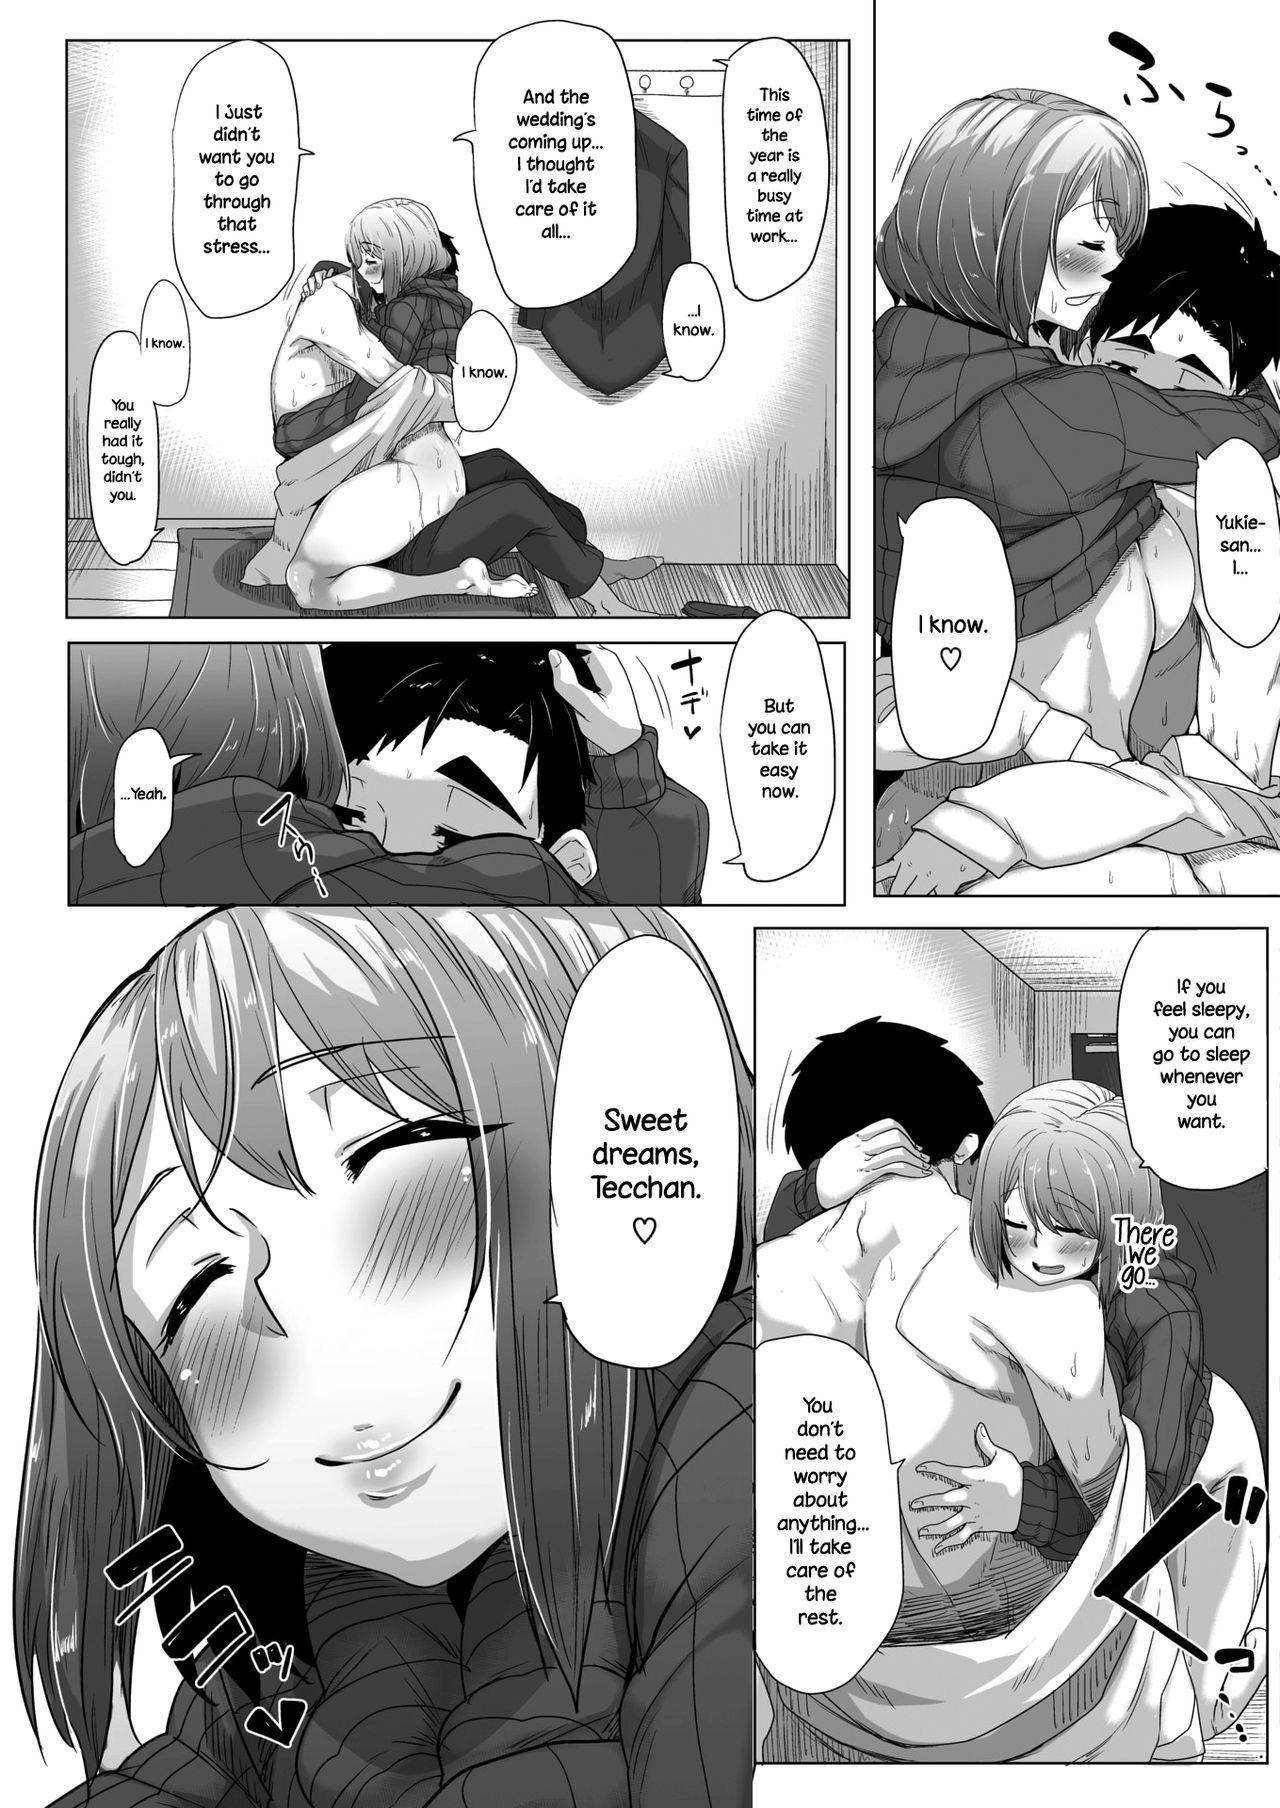 Students Daijoubu? Oppai Momu? | Are you alright? Do you need to rub some boobs? Cartoon - Page 19